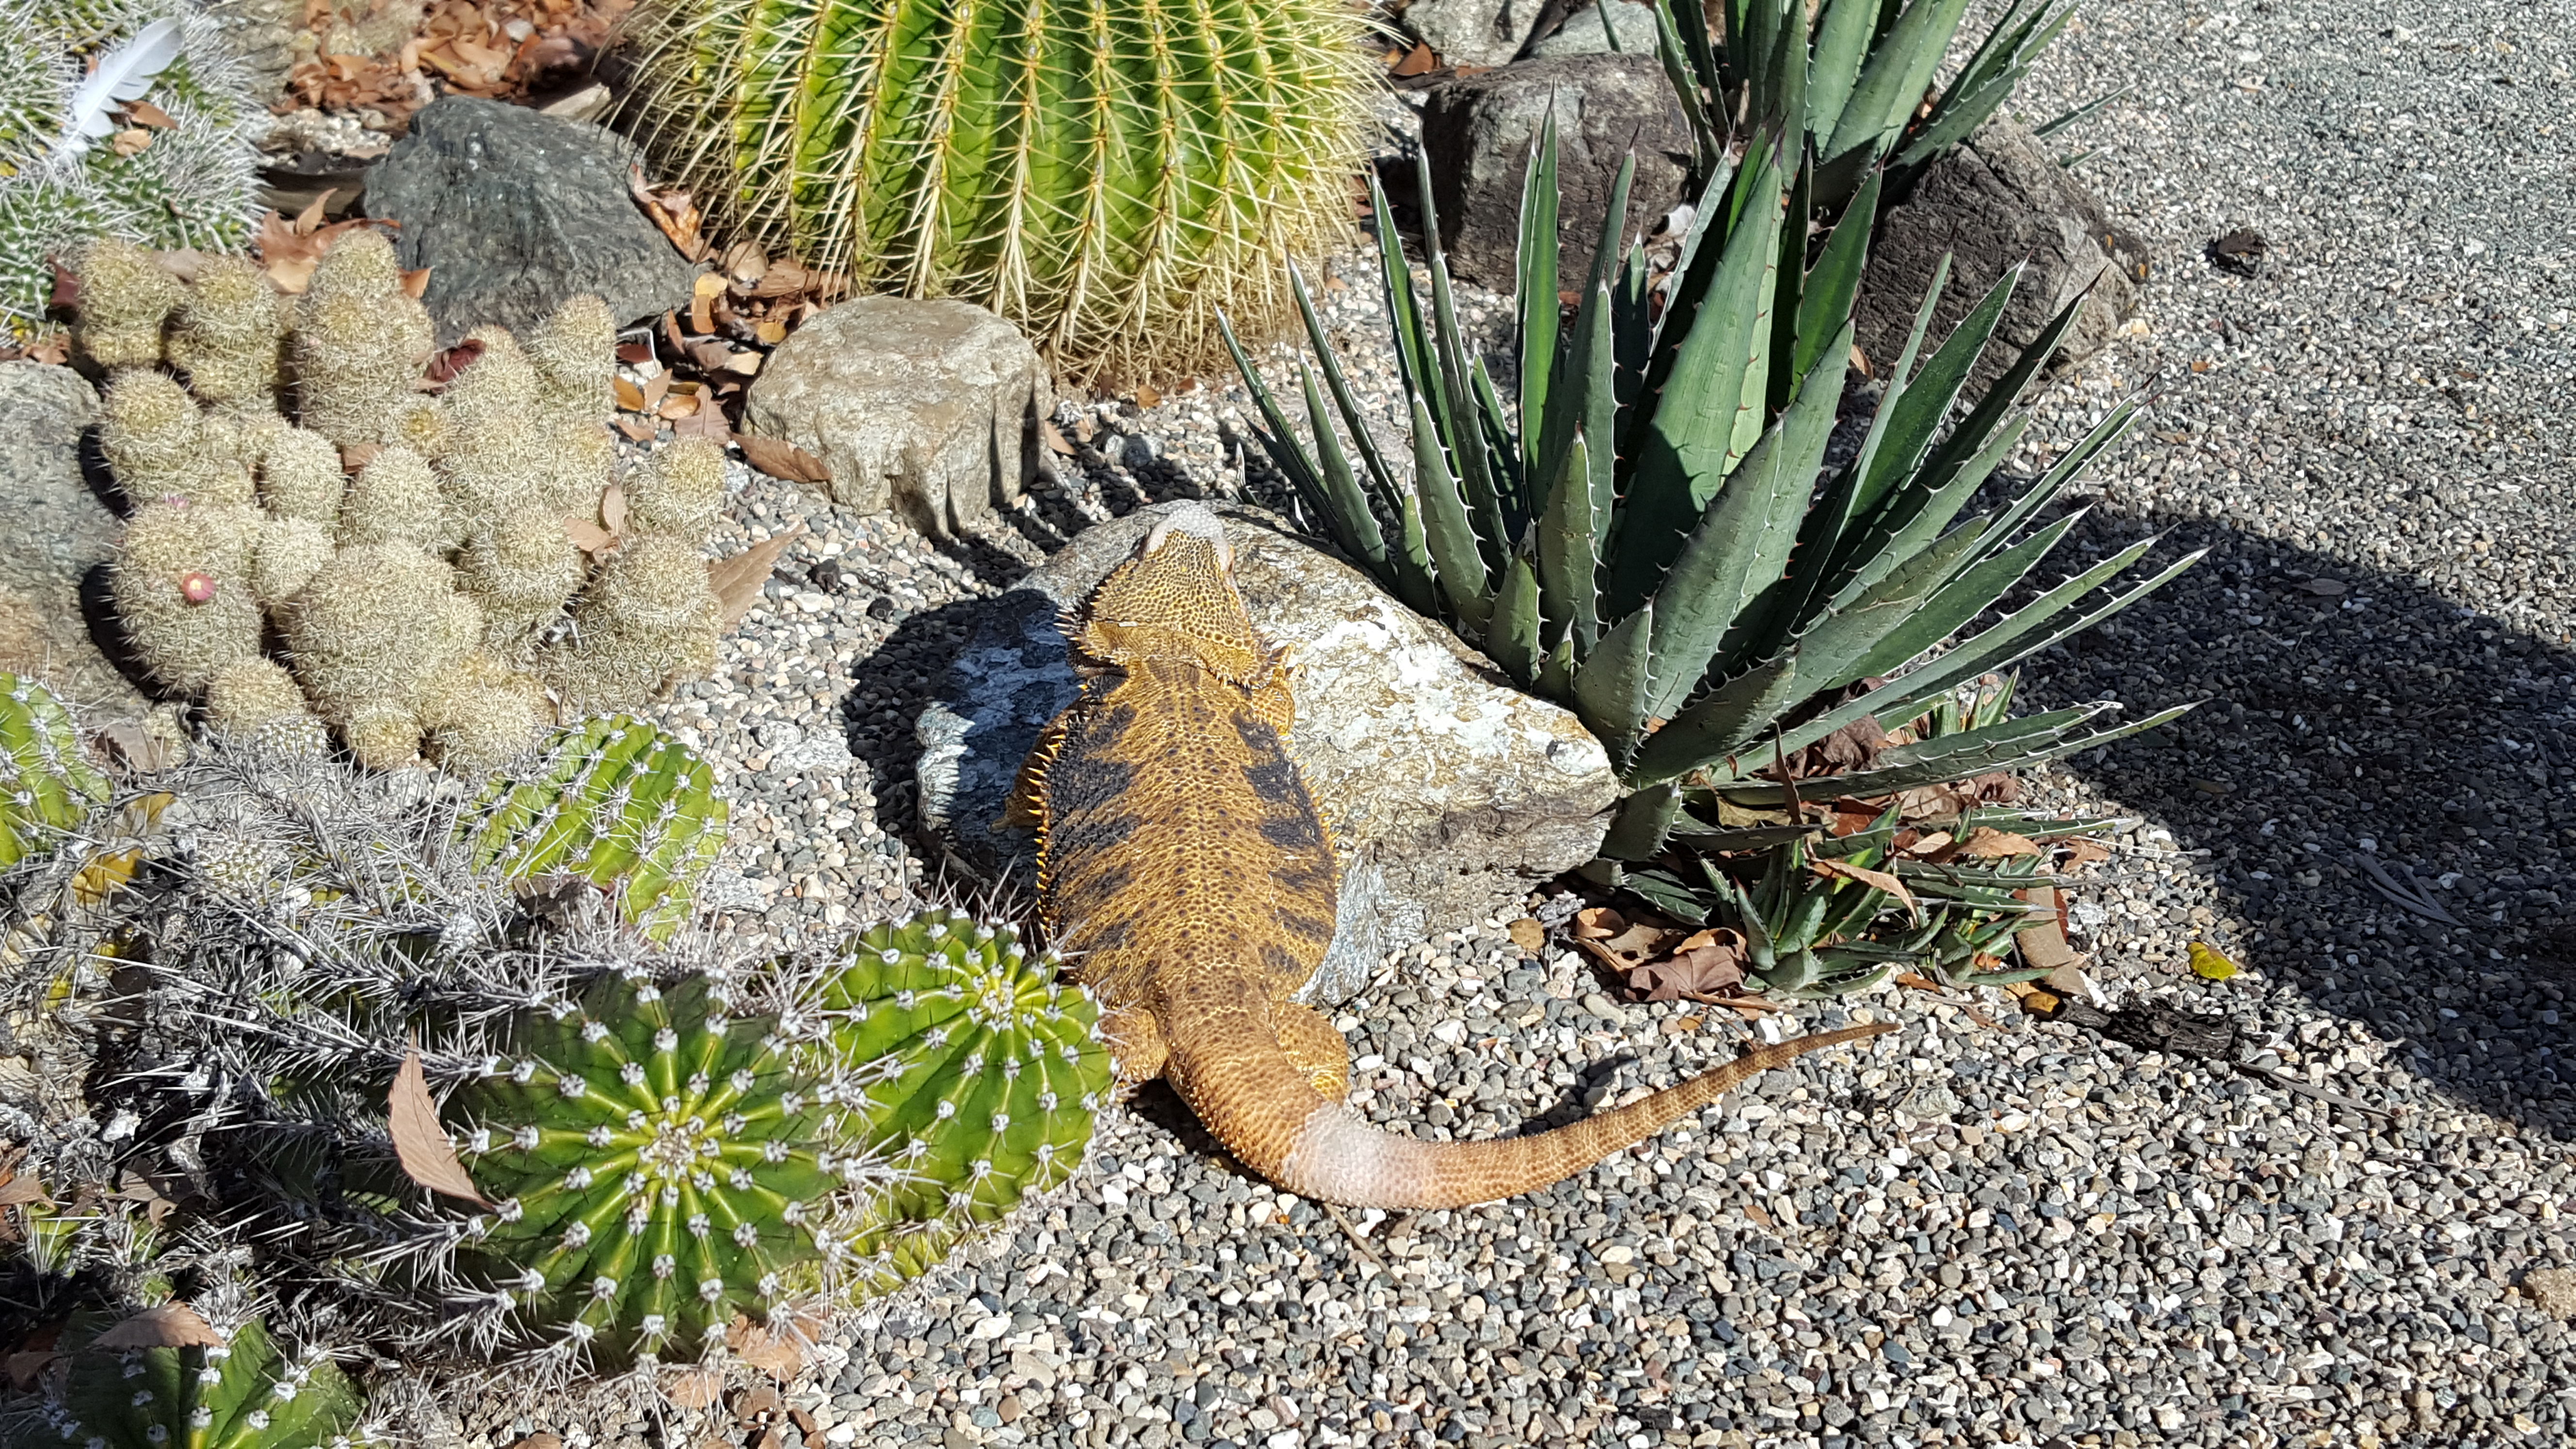 SLM catching some rays in the cactus patch